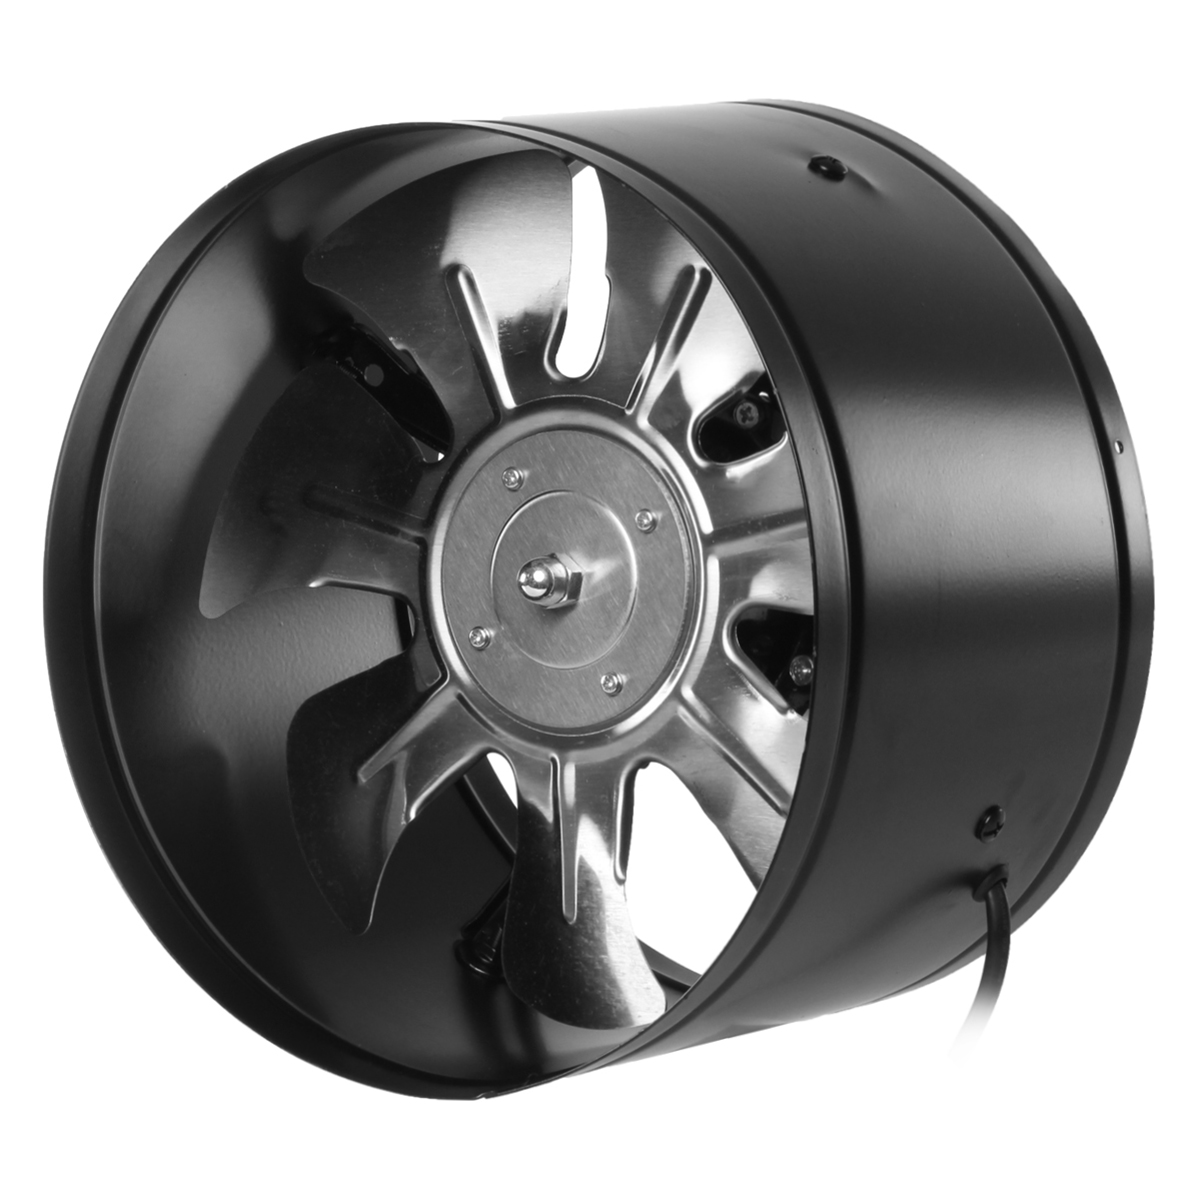 220V-46810-Inch-Inline-Duct-Fan-Booster-Exhaust-Blower-Air-Cooling-Vent-Black-1353811-8